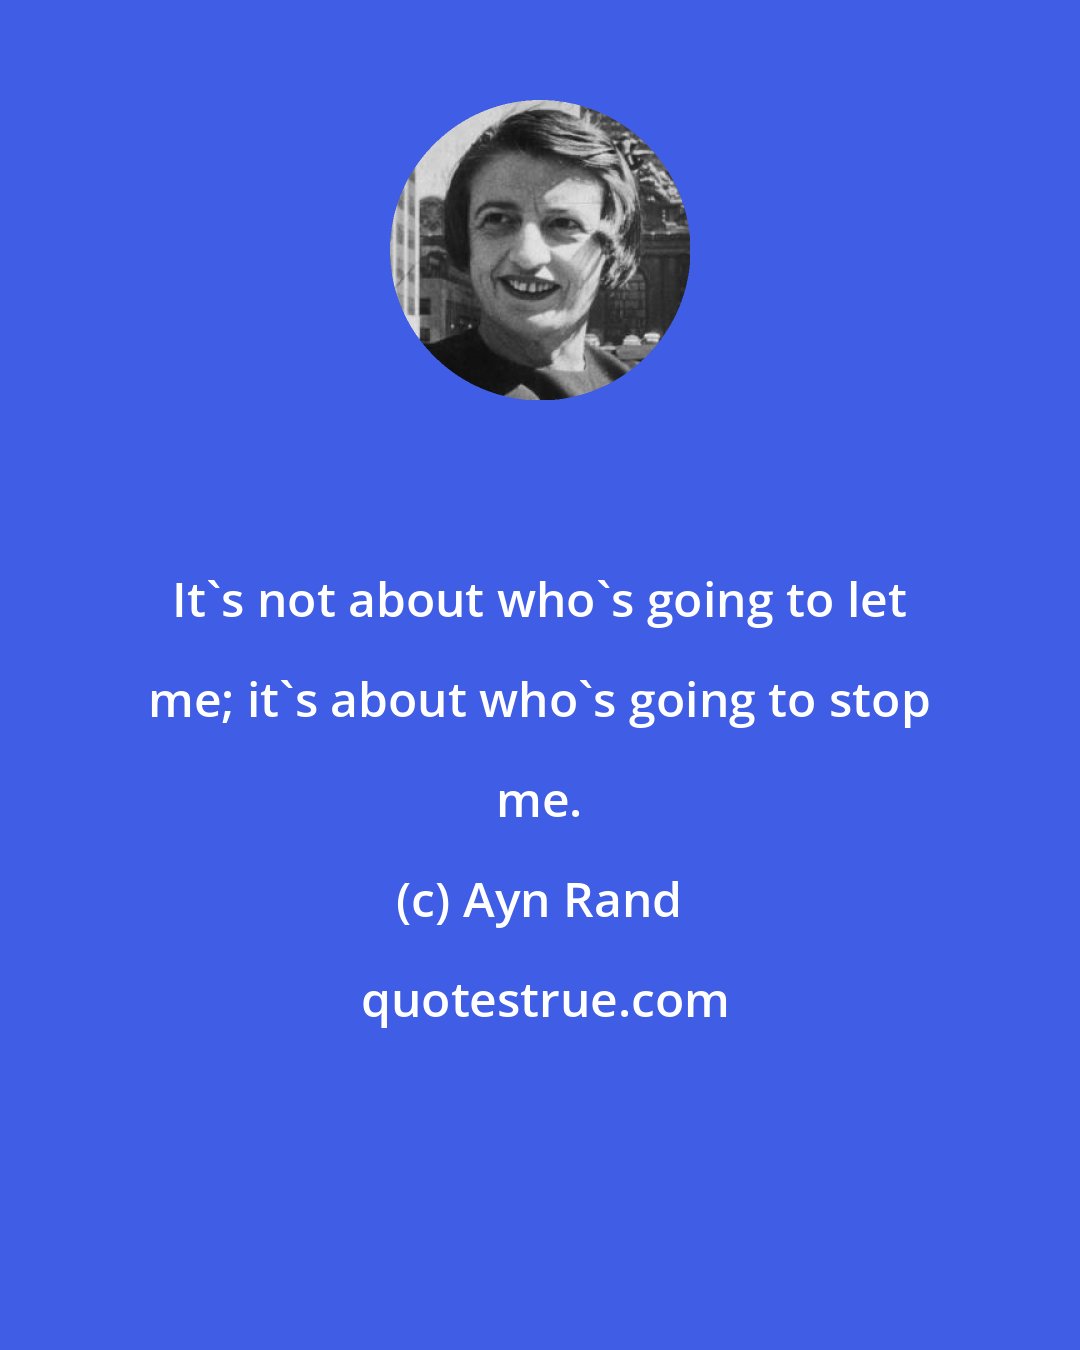 Ayn Rand: It's not about who's going to let me; it's about who's going to stop me.